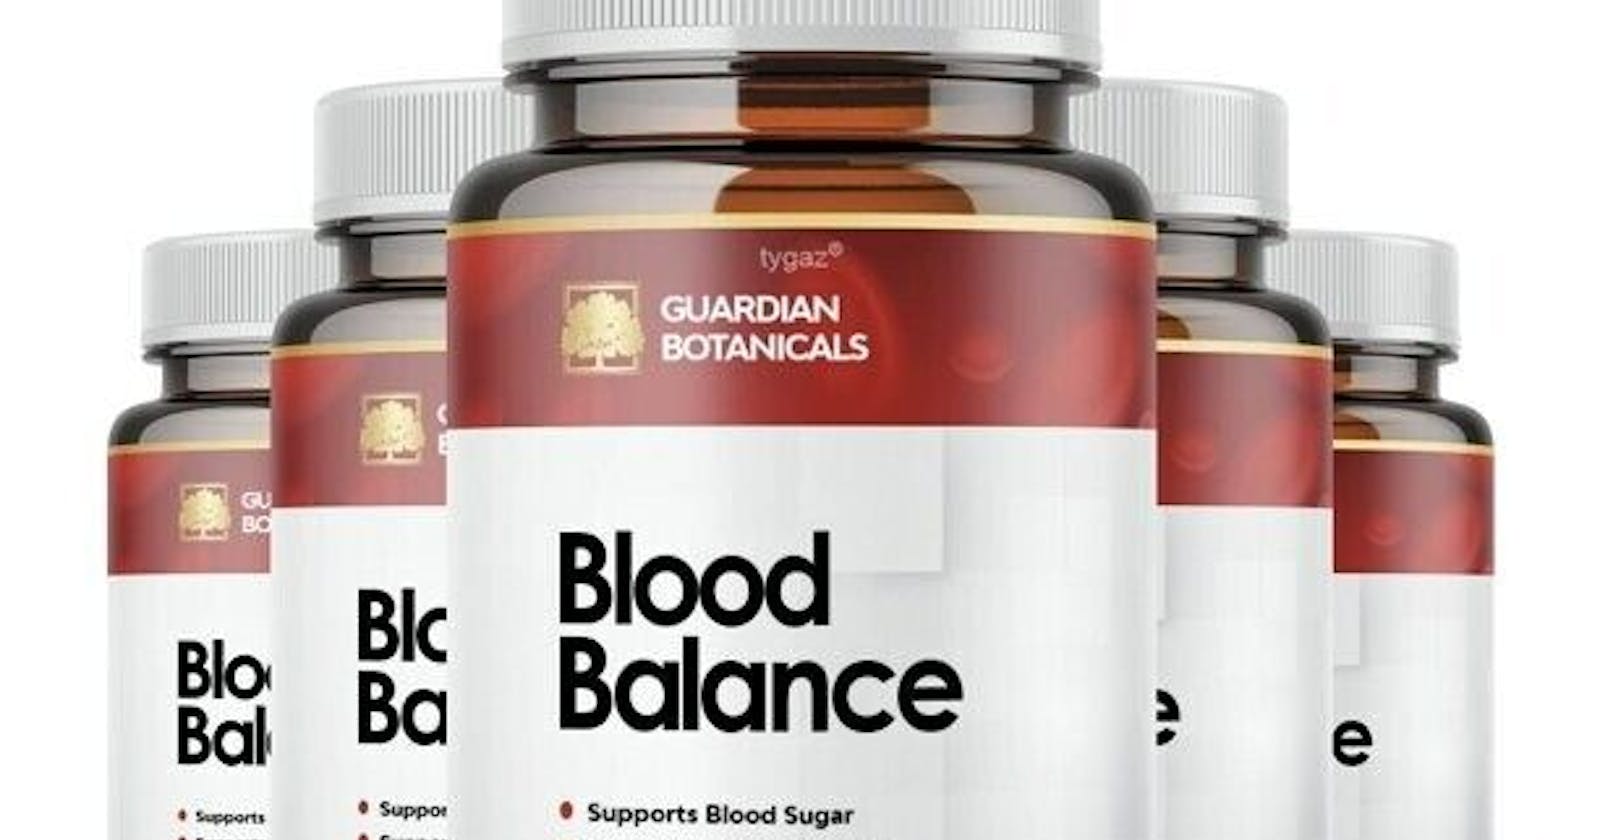 Blood Balance Reviews Does It Work? Ingredients, Benefits, Amazon & Where To Buy?